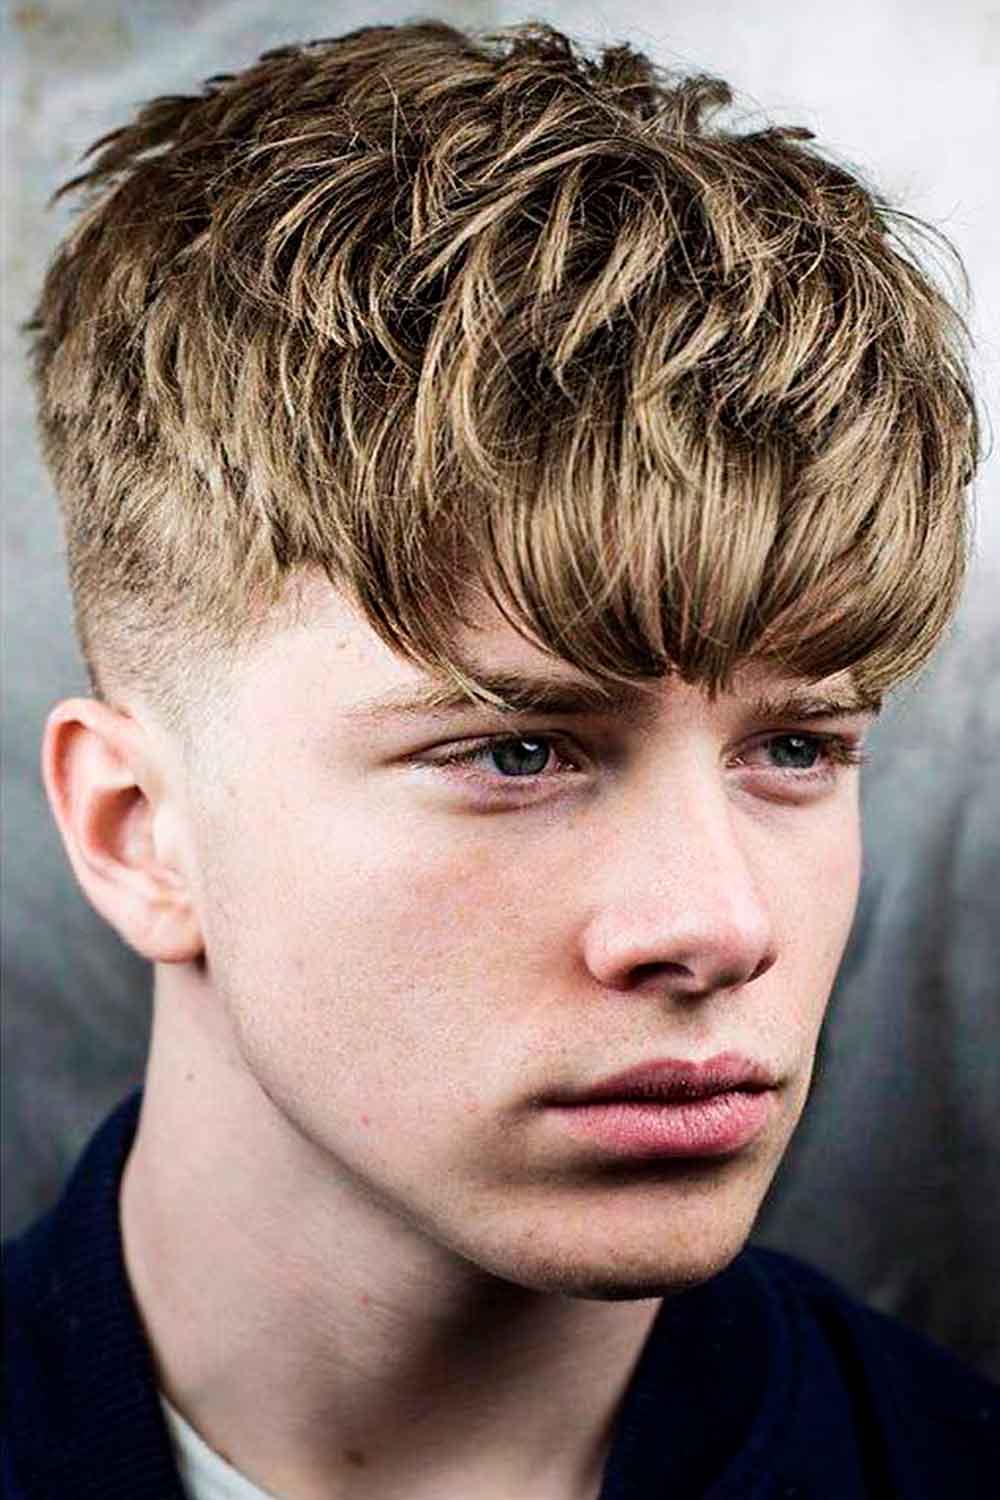 Layered Bang #promhairstyles #promhairstylesformen #formalhairstyles #mensformalhairstyles